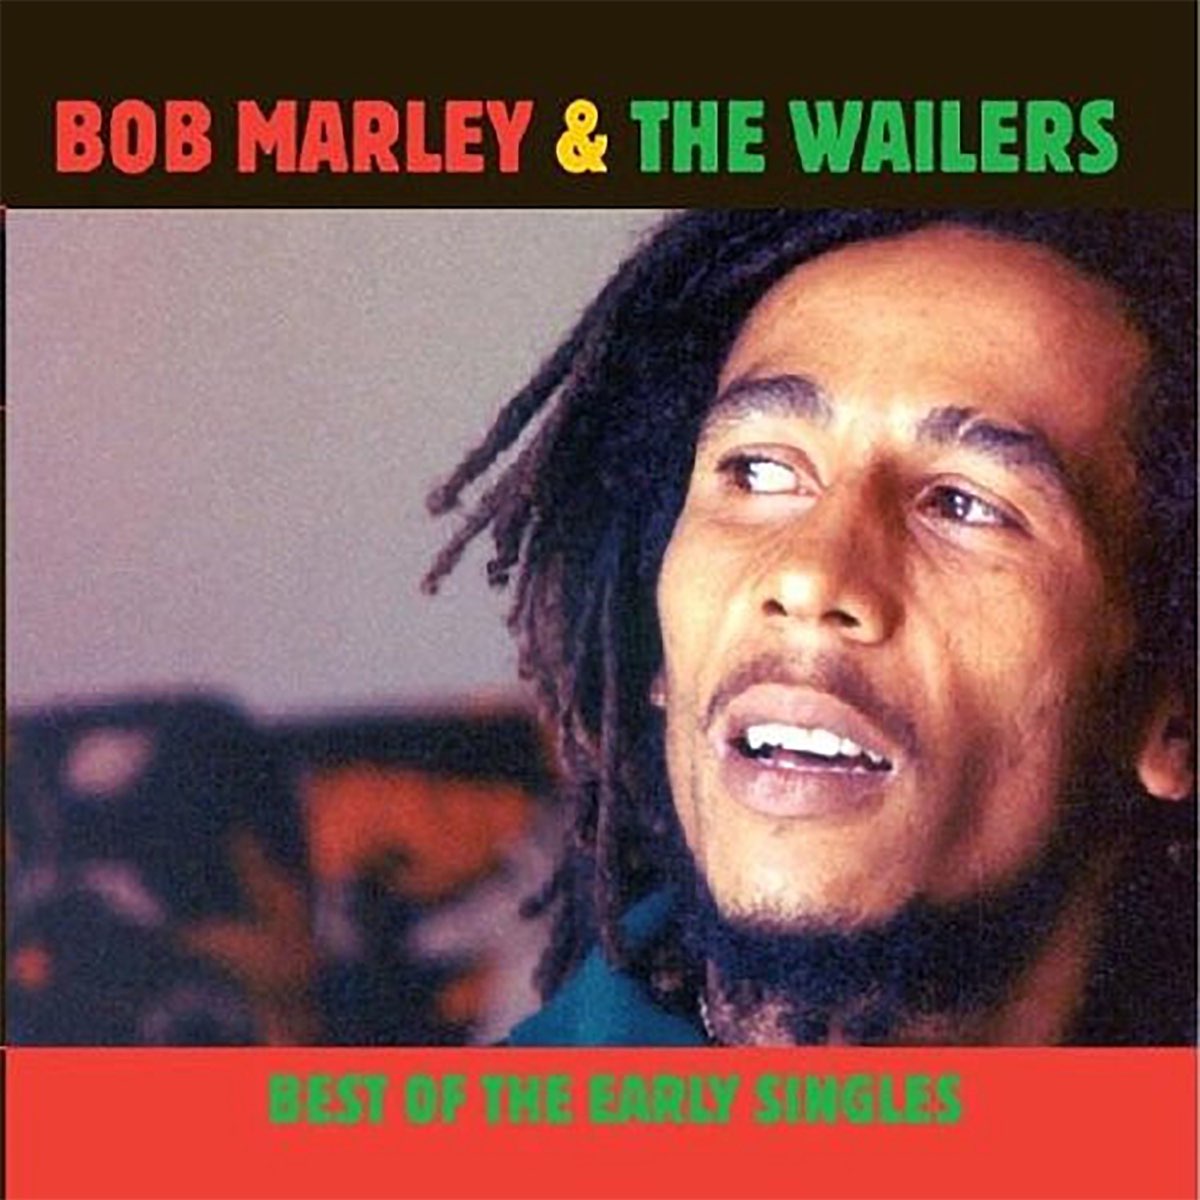 ‎The Best Of The Early Singles - Album by Bob Marley & The Wailers ...